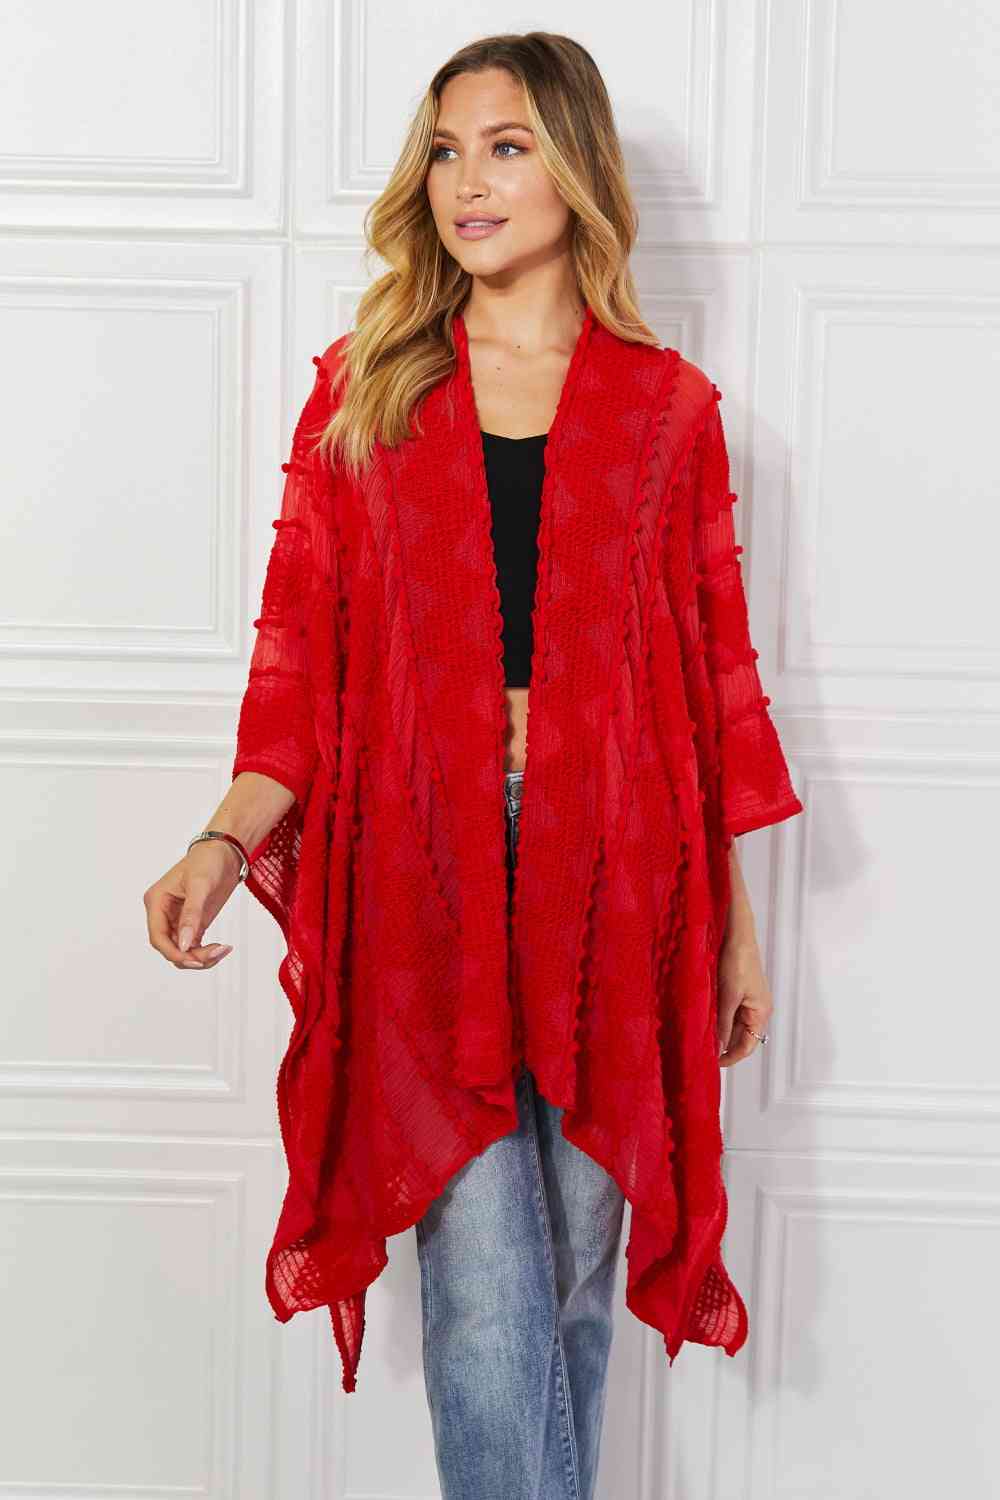 Pom-Pom Asymmetrical Poncho Cardigan in Red - Red / One Size - Women’s Clothing & Accessories - Outerwear - 8 - 2024